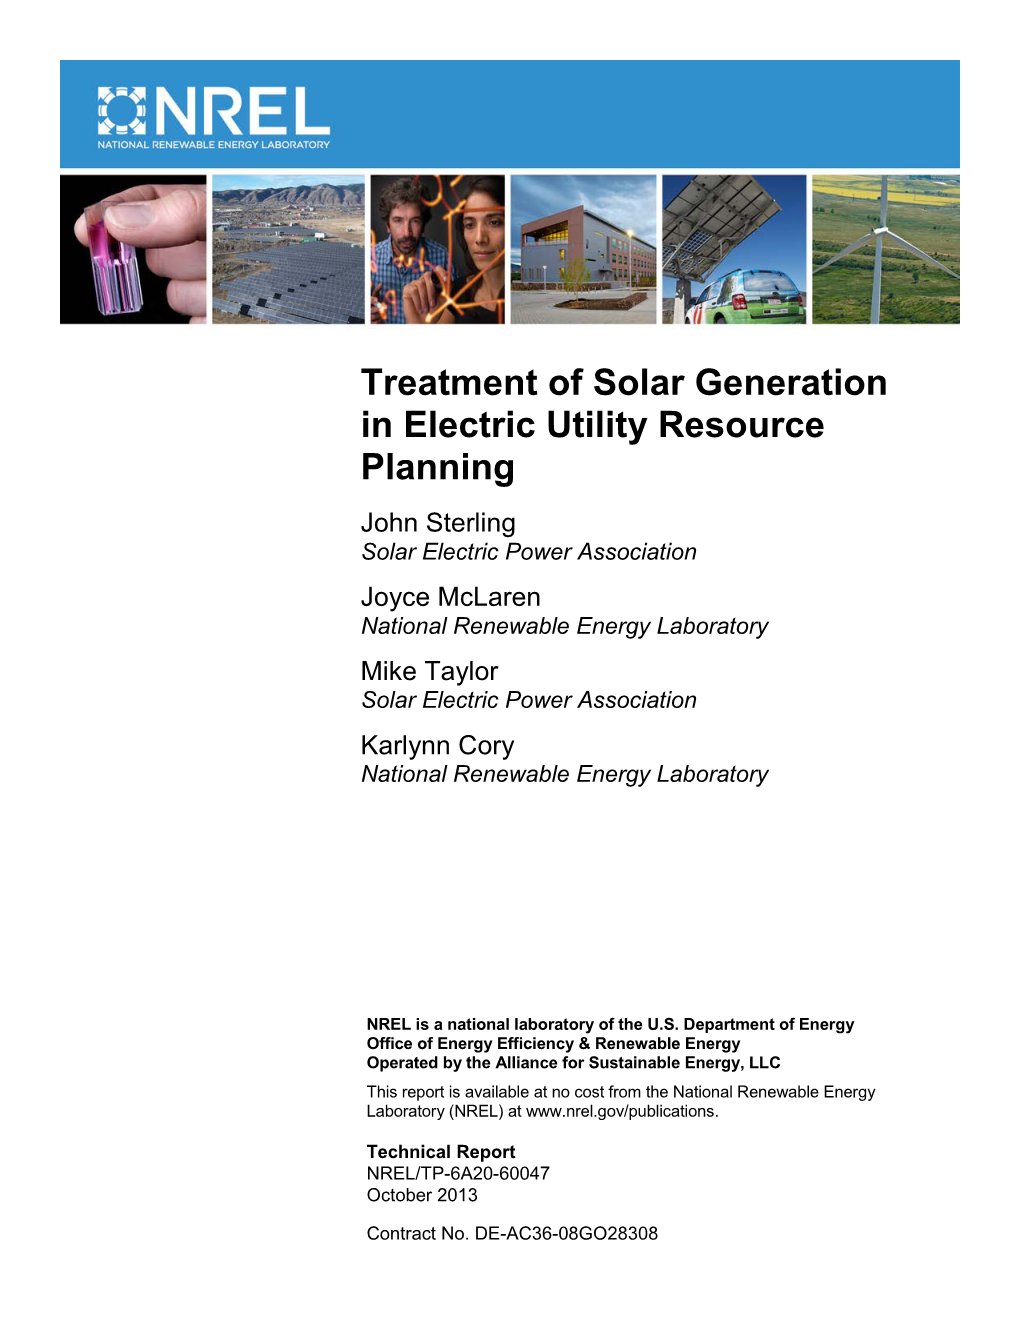 Treatment of Solar Generation in Electric Utility Resource Planning